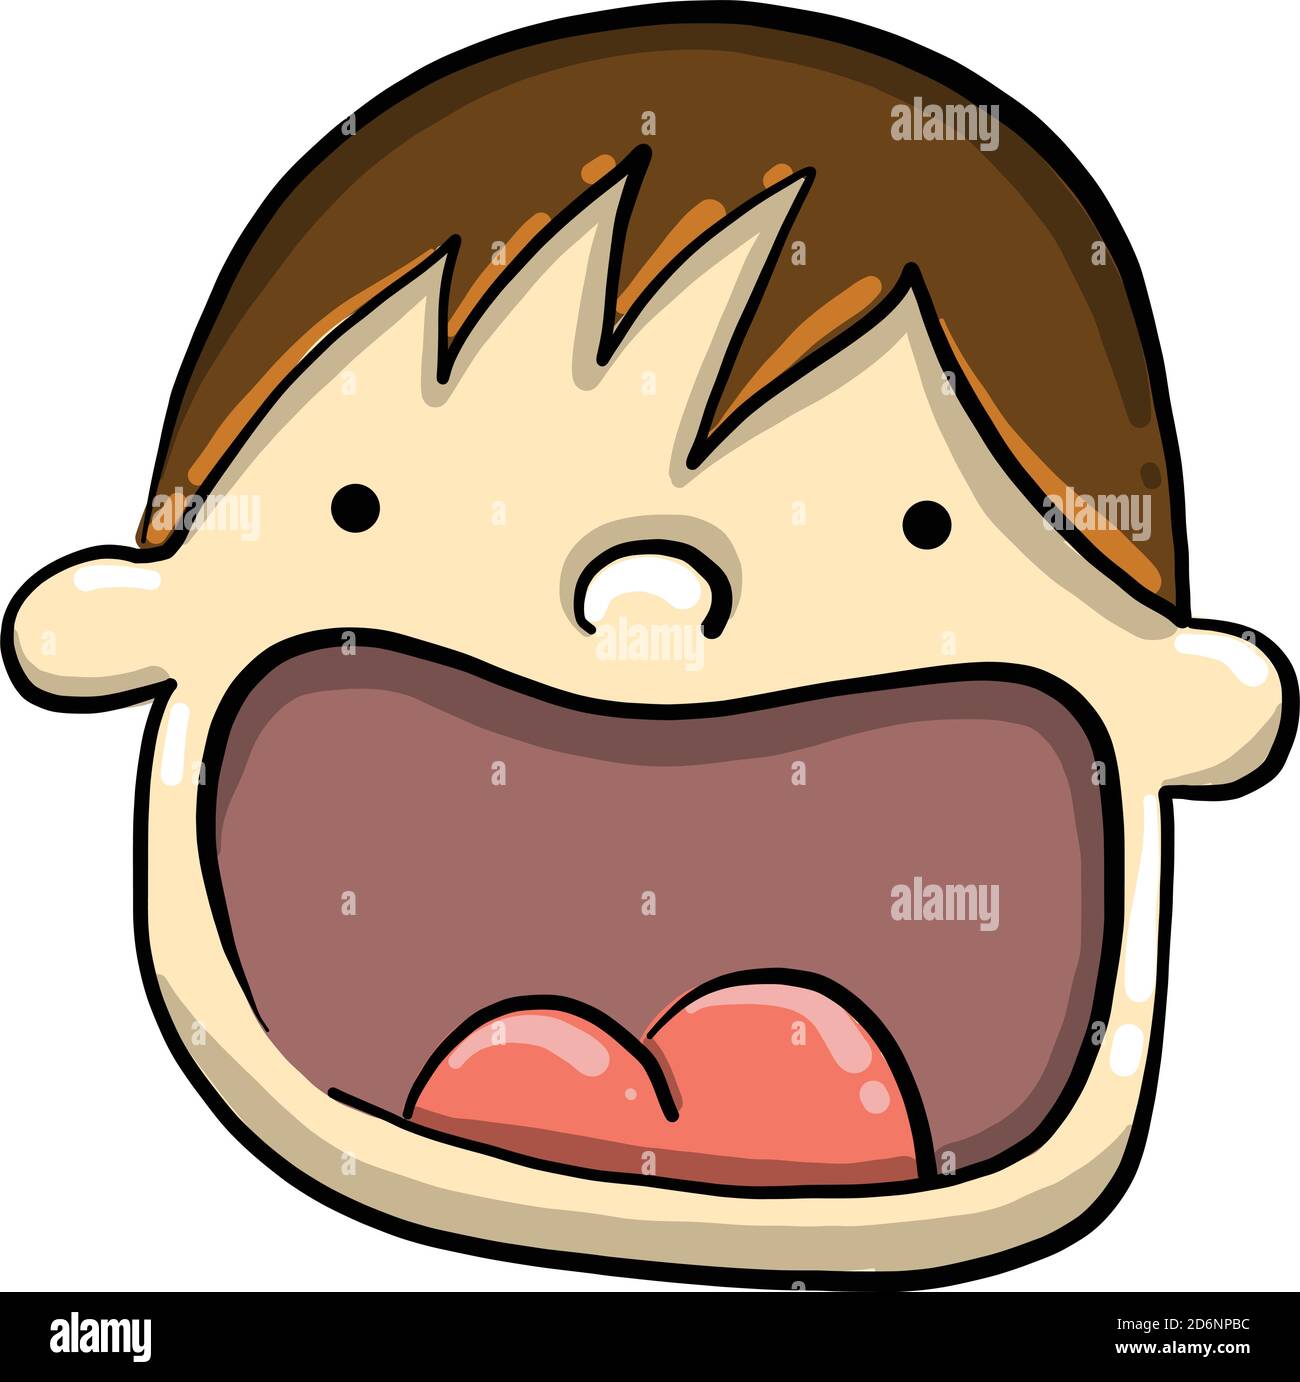 Cat Emoji Frowning Pictorial Representation Mouth Open Stock Vector by  ©get4net 564475148